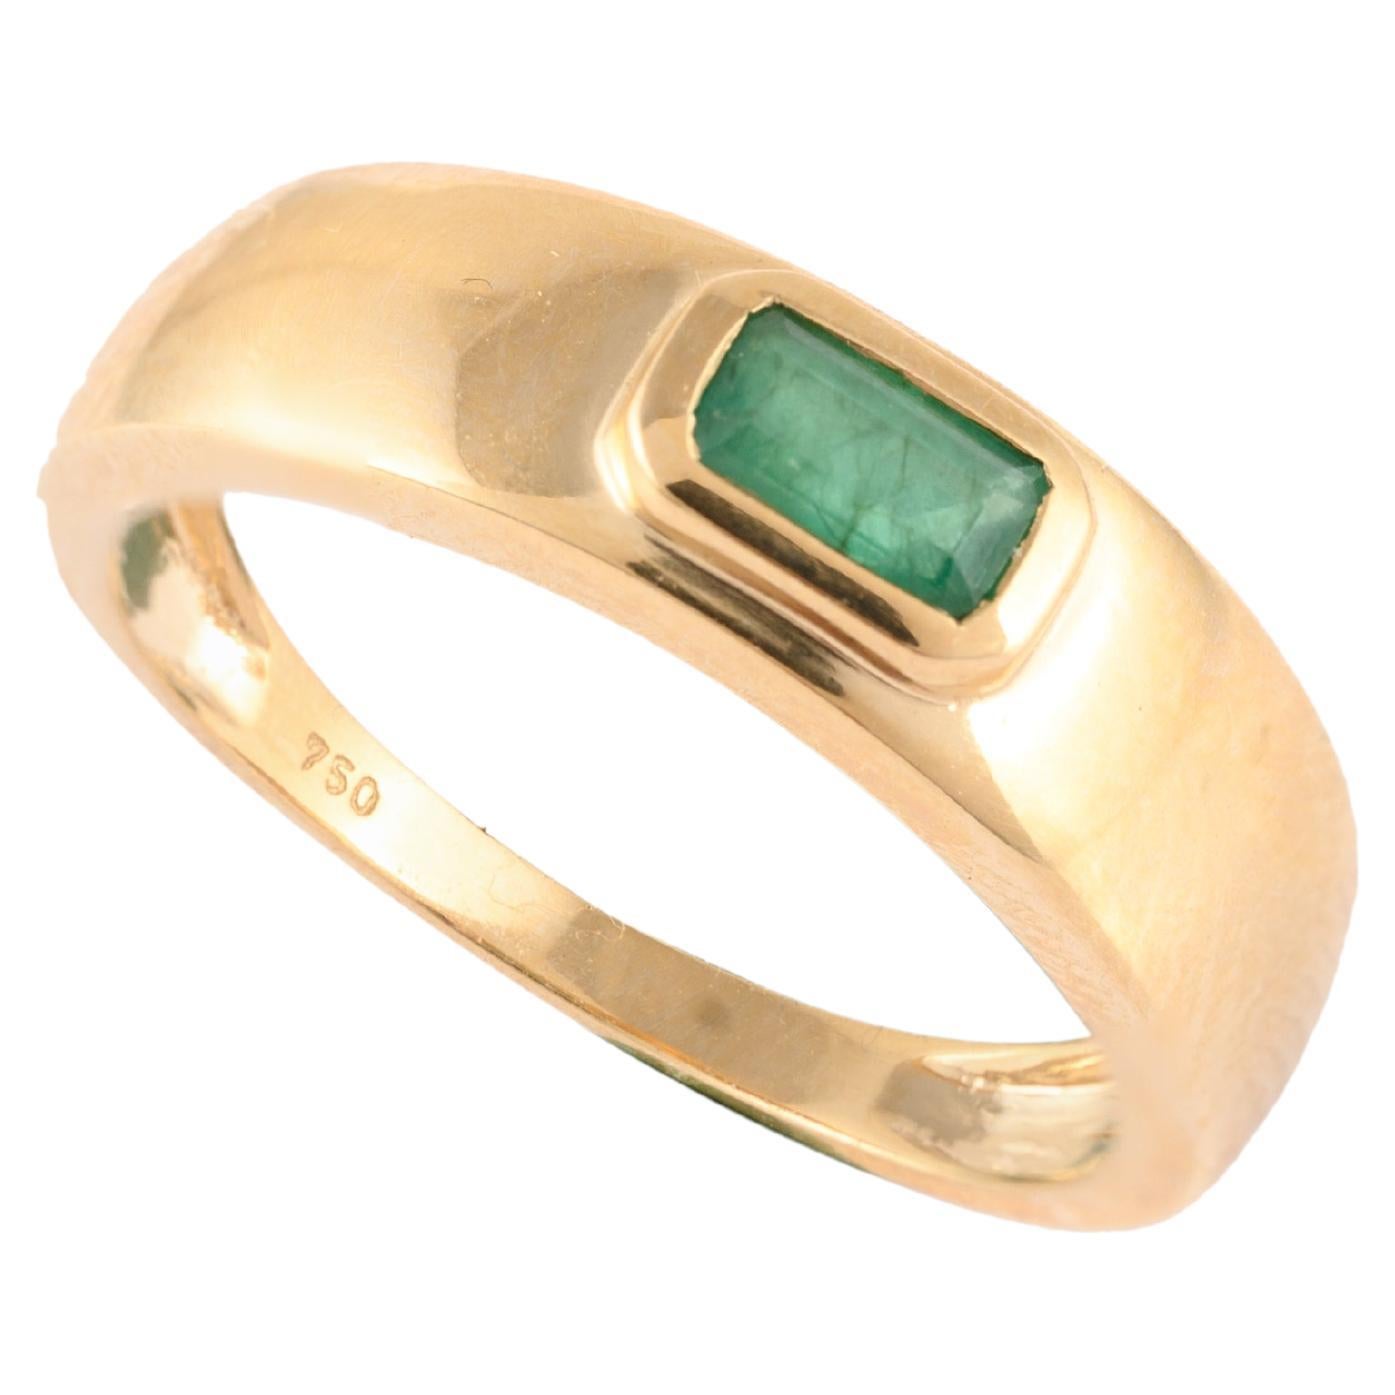 For Sale:  Unisex Natural Baguette Cut Emerald May Birthstone Ring in 18k Yellow Gold